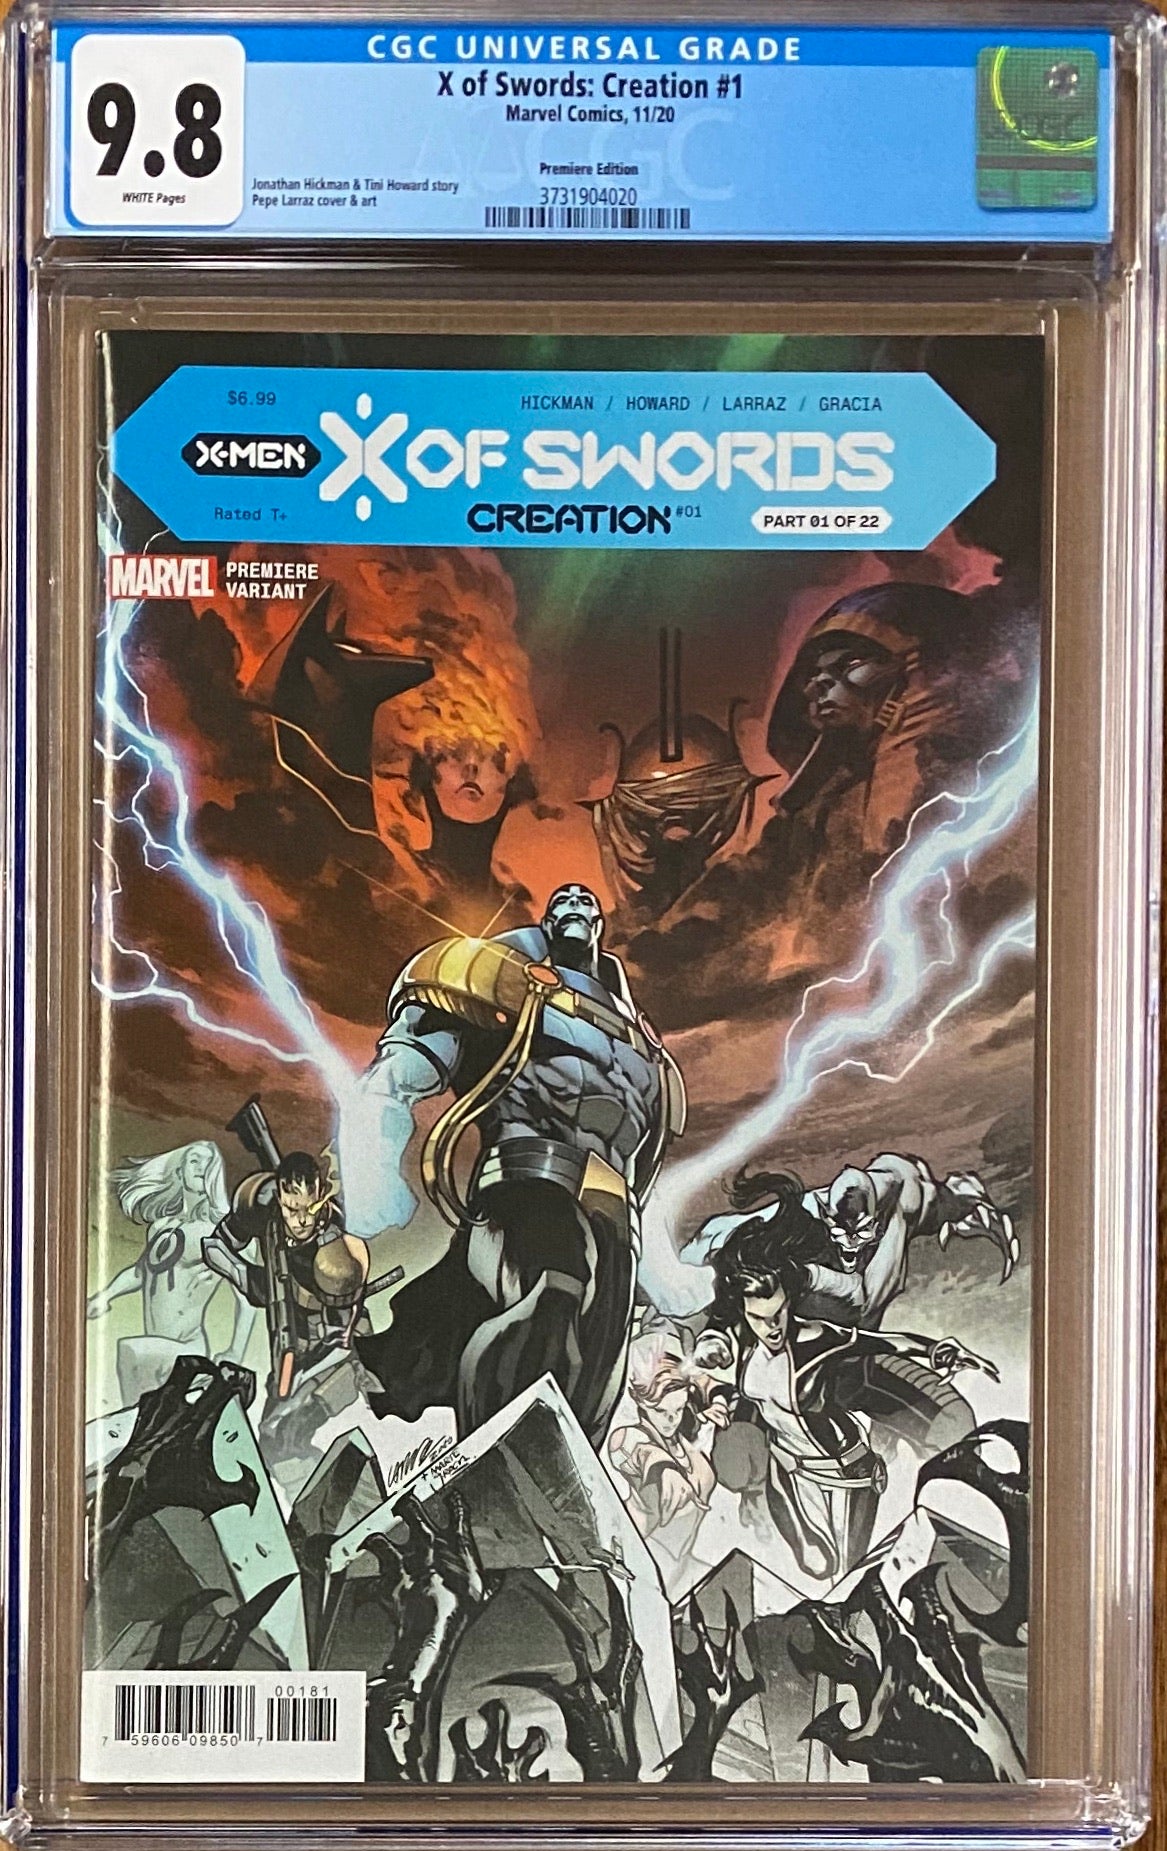 X of Swords: Creation #1 Premiere Edition Variant CGC 9.8